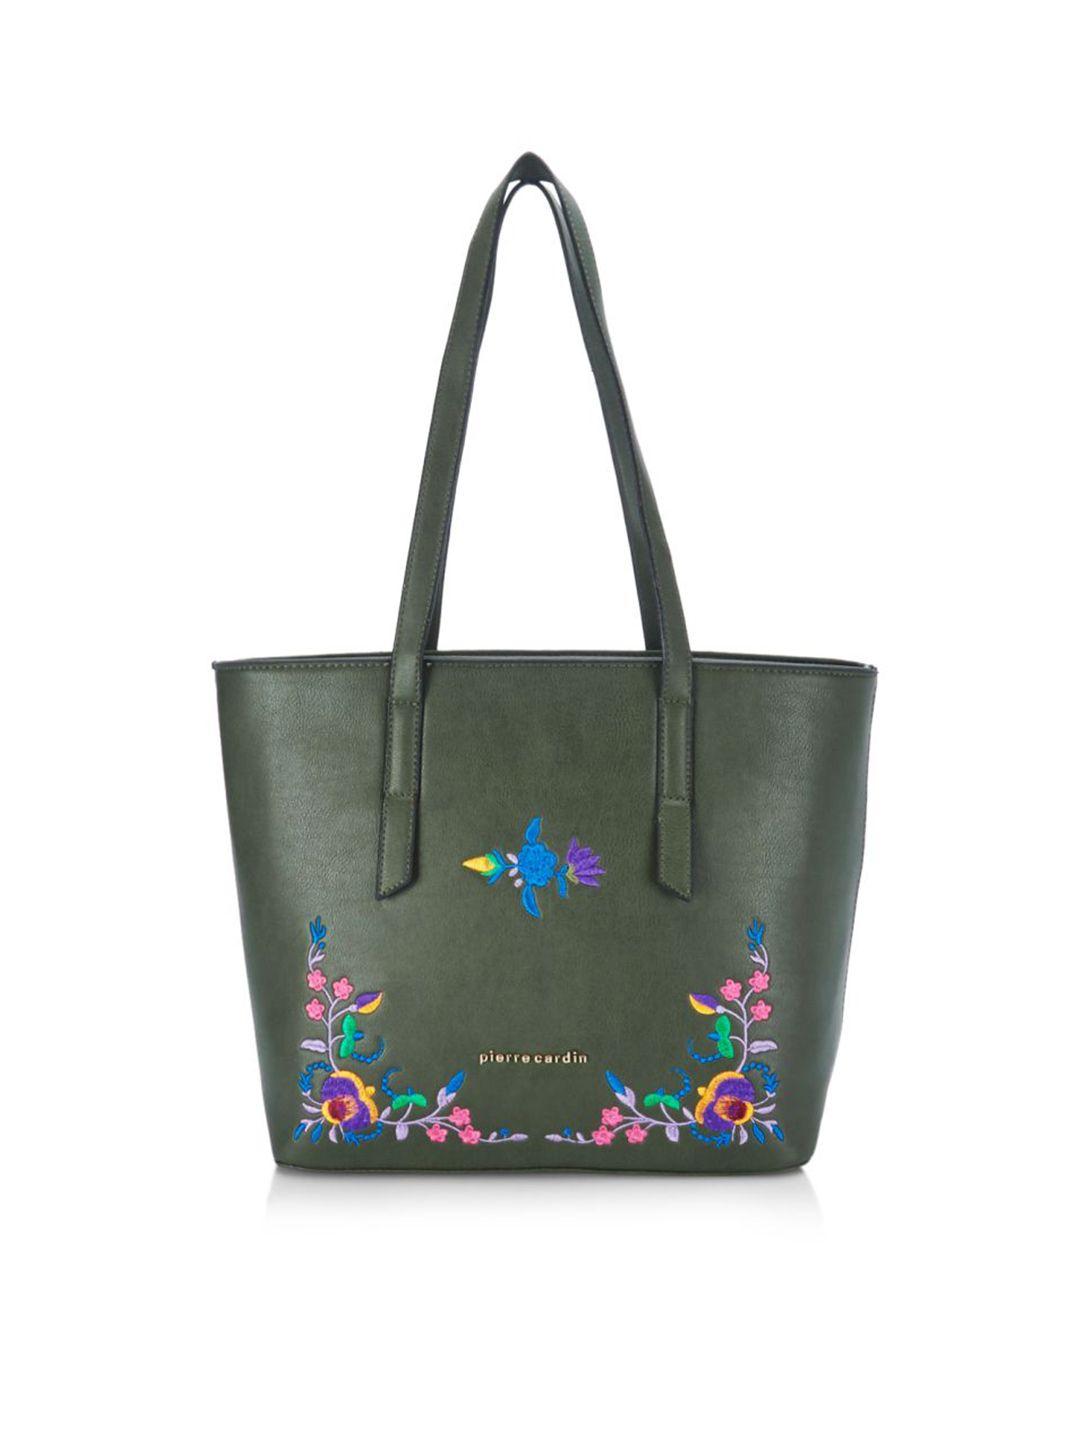 pierre cardin olive green embroidered tote bag